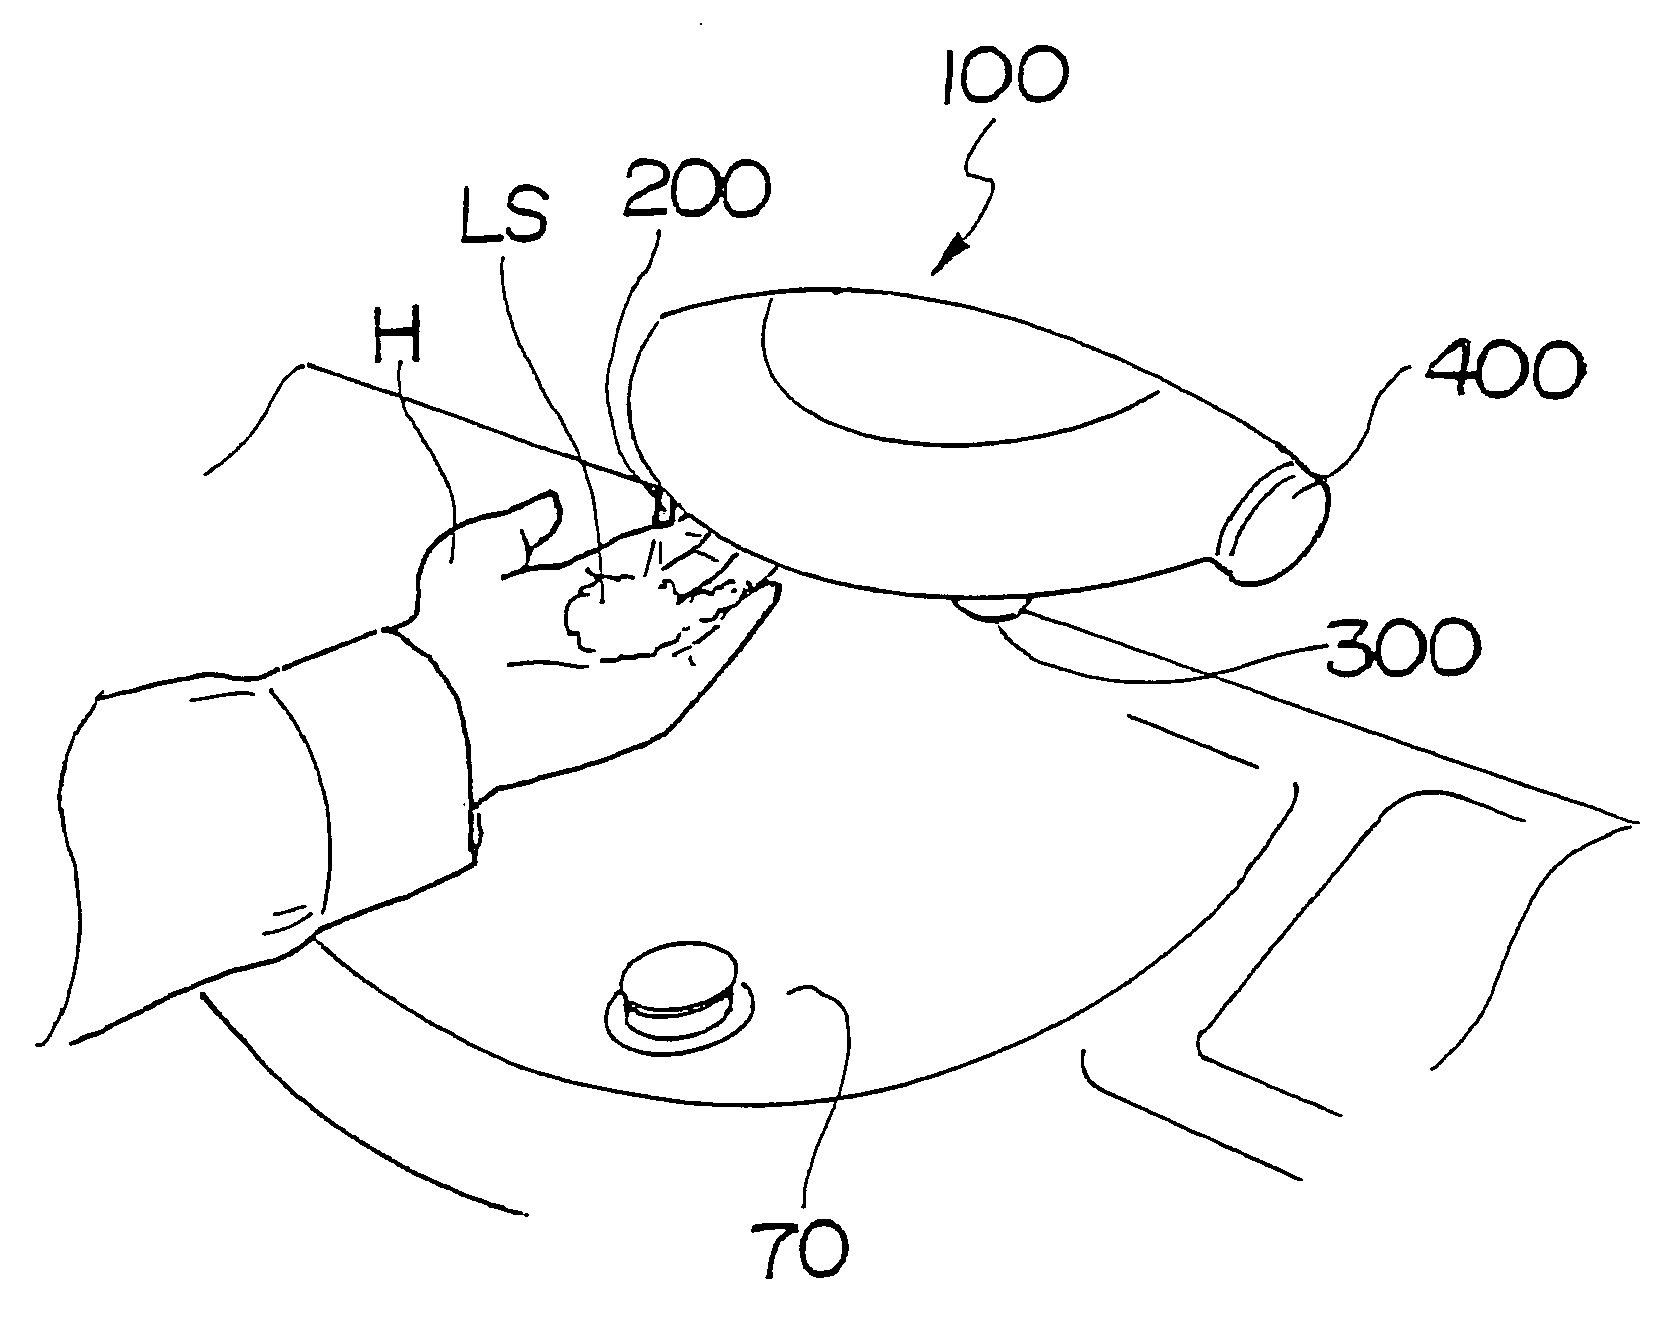 Automatic faucet for lavatory unit of aircraft